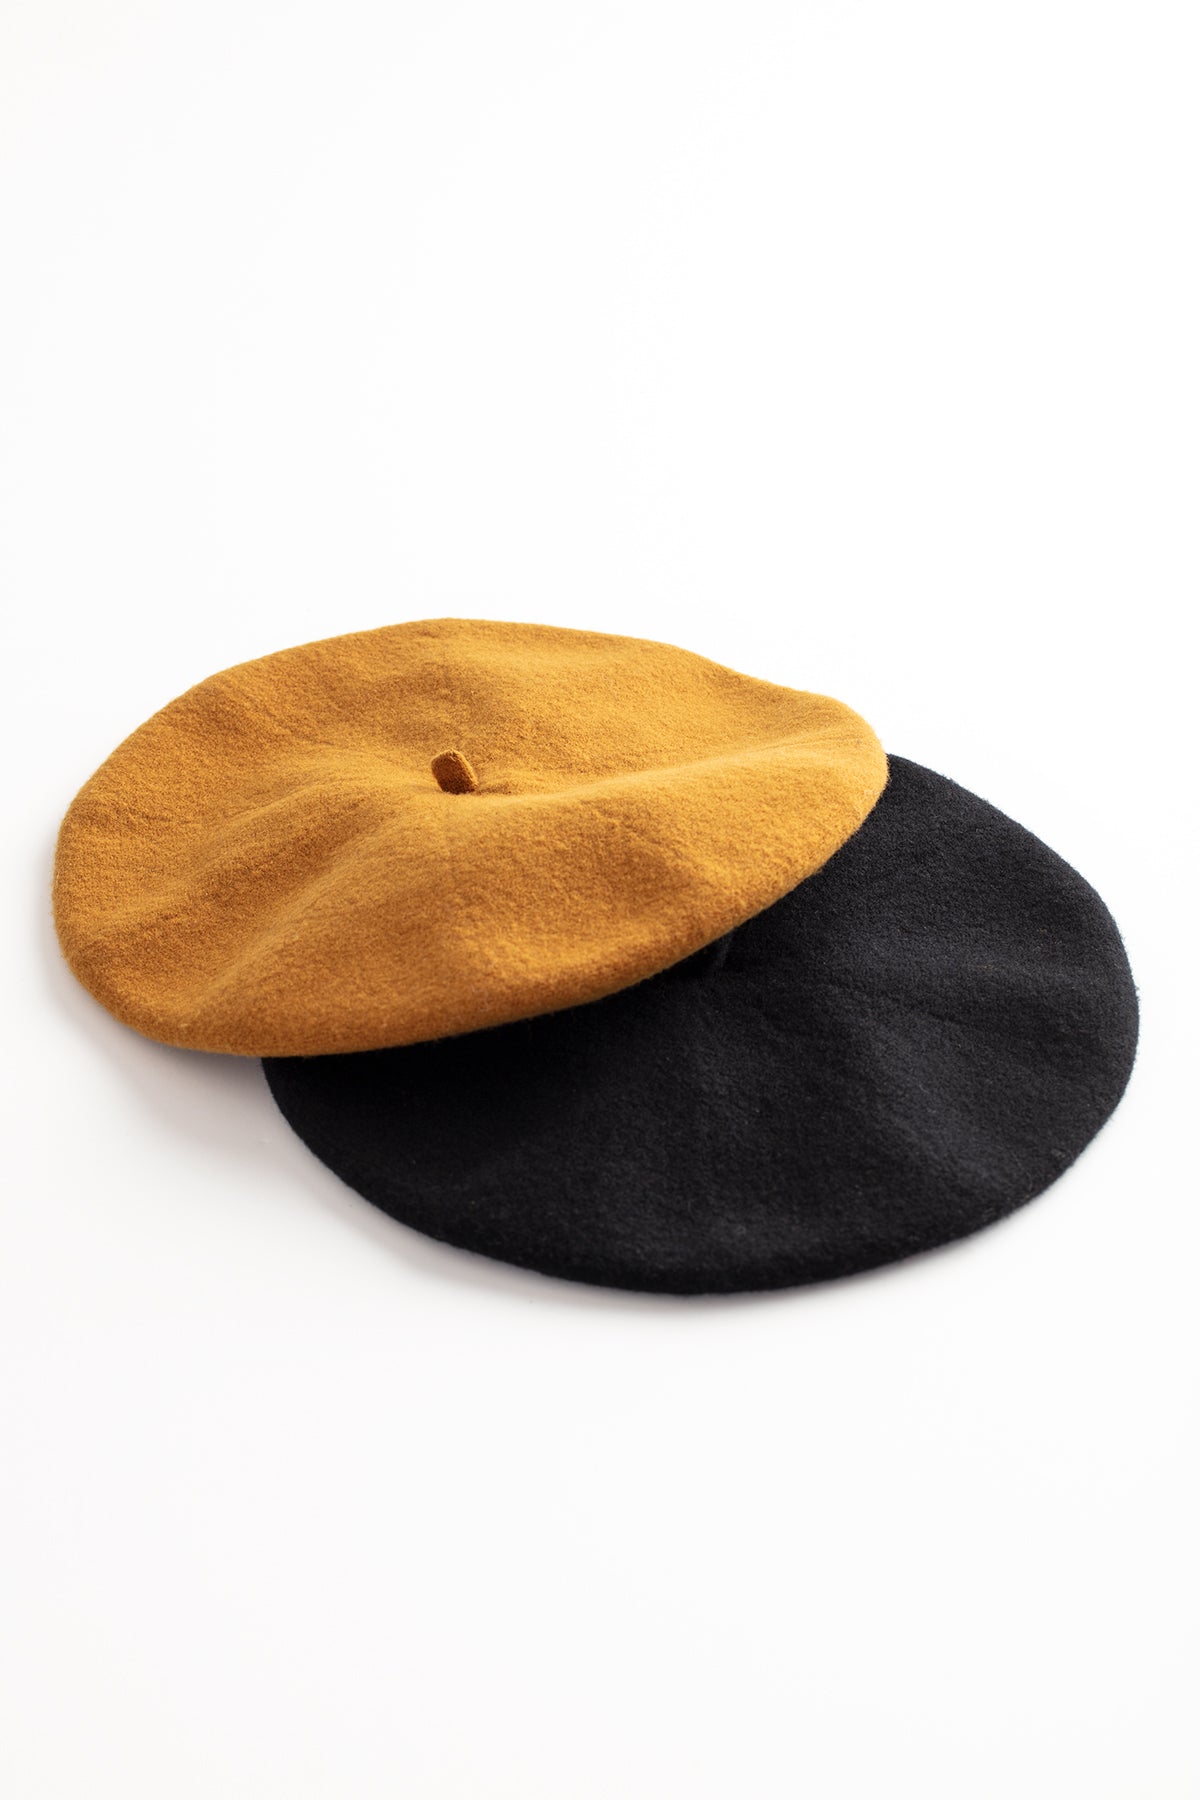 Two Gigi Berets by Hansel from Basel, made of a Merino wool blend, on a white surface.-615355842641